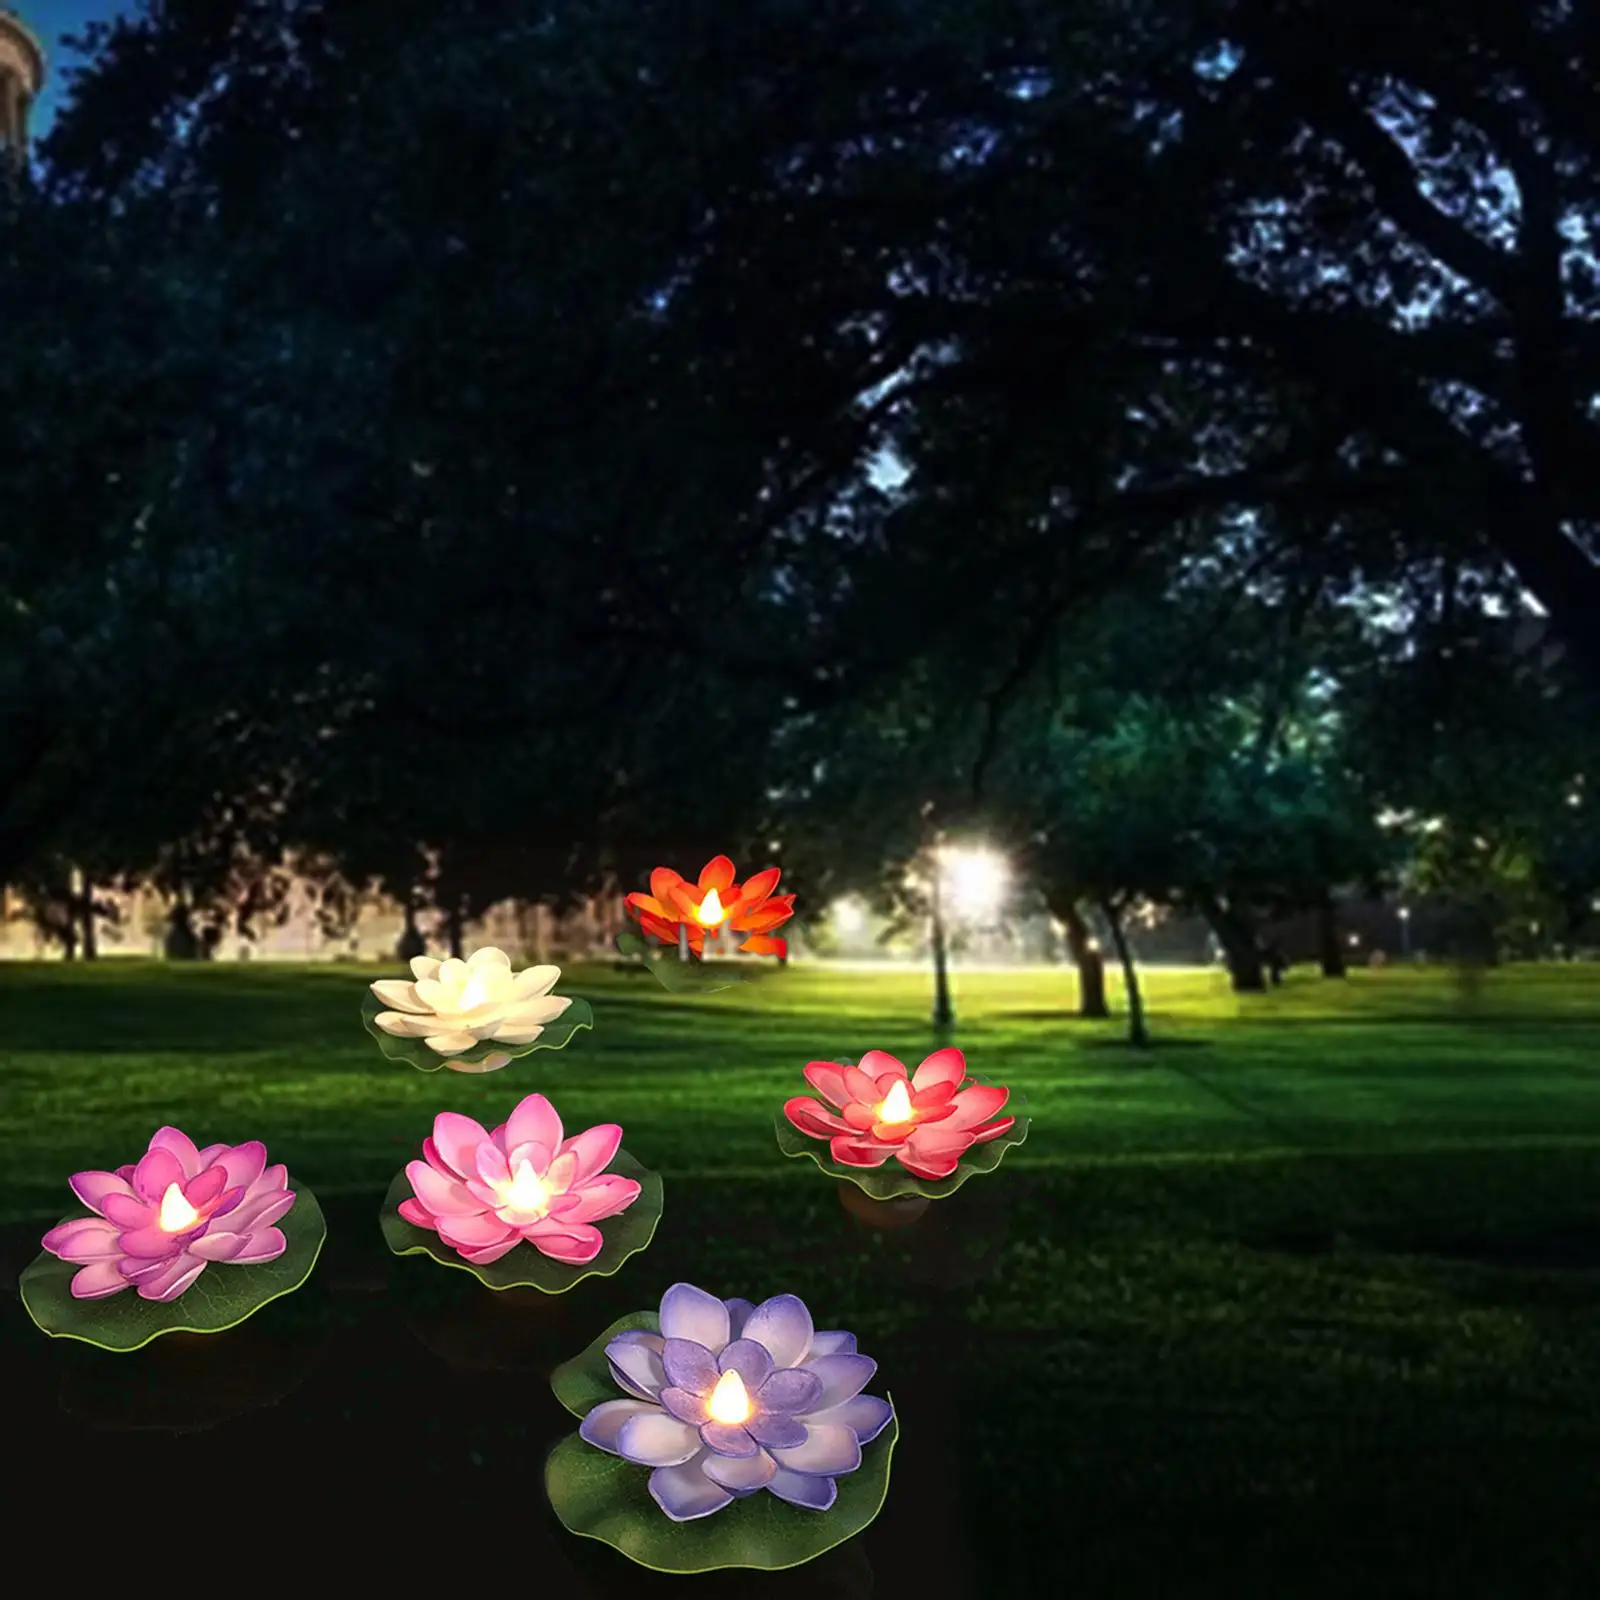 6Pcs LED Floating Lotus Lamp Realistic Night Light Wishing Pond Lights Garden Pool Lamp for Outdoor Pond Yard Decoration